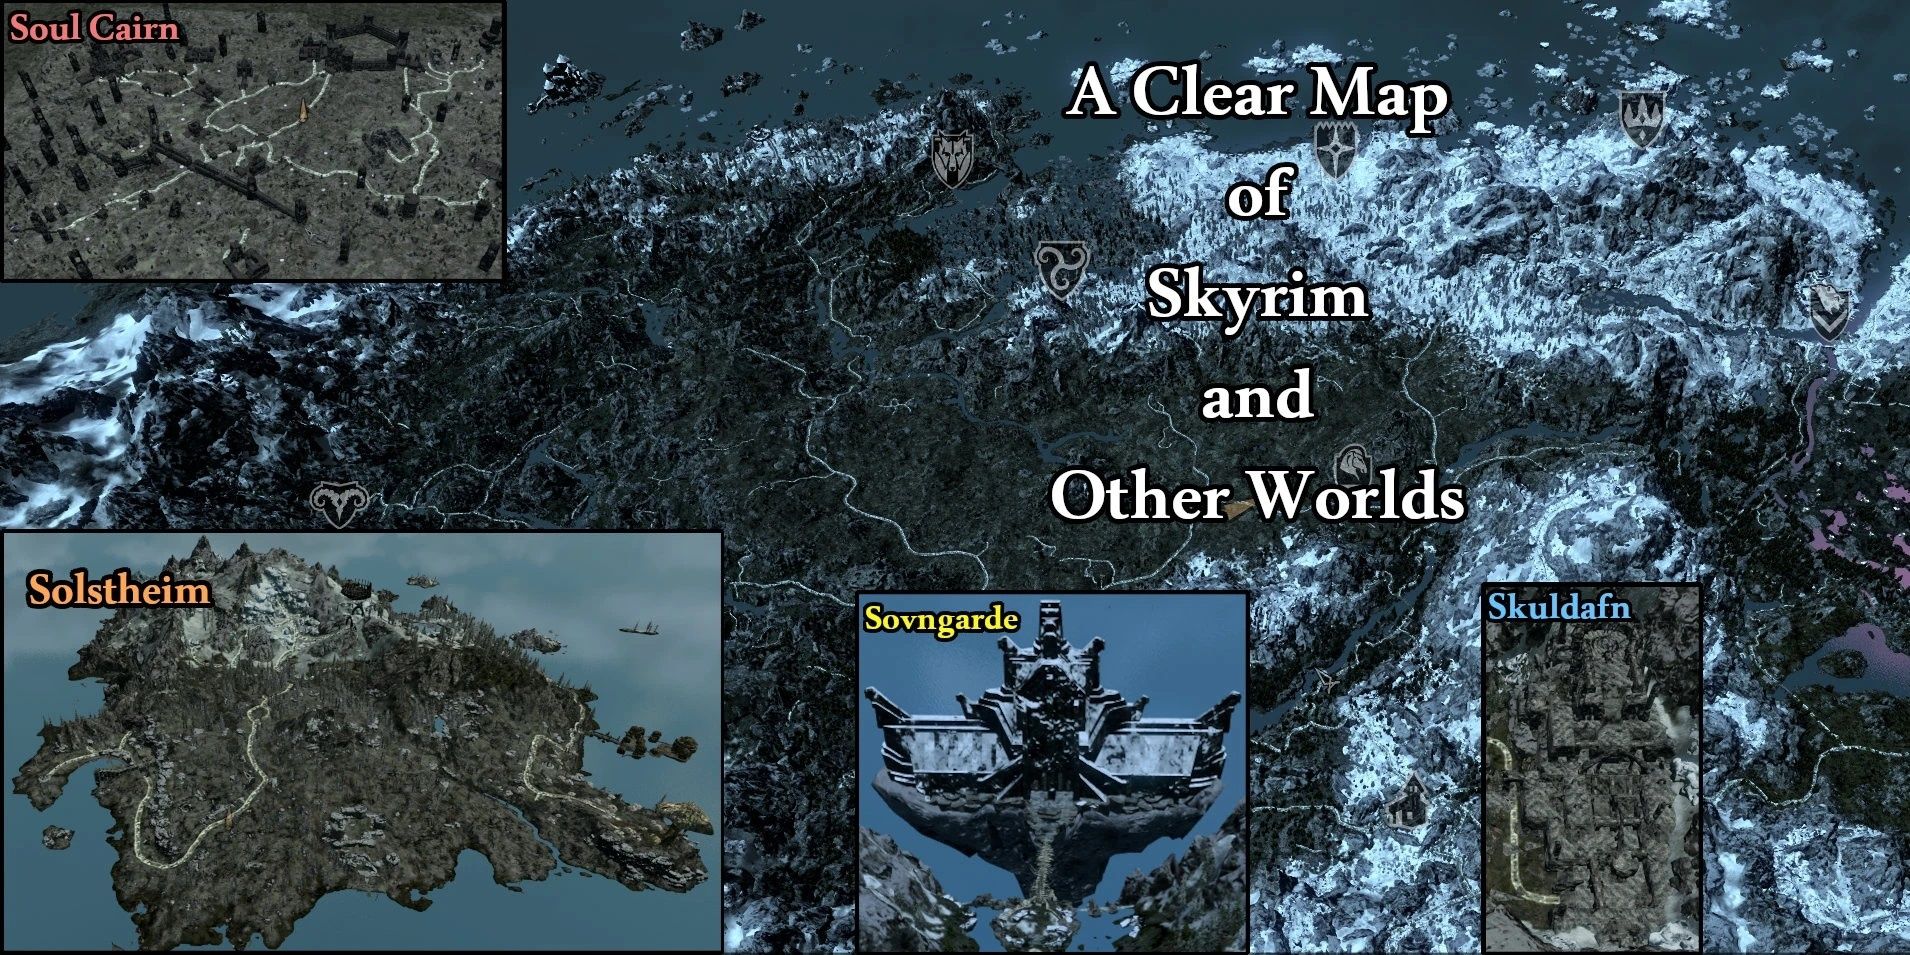 A Clear Map of Skyrim and Other Worlds